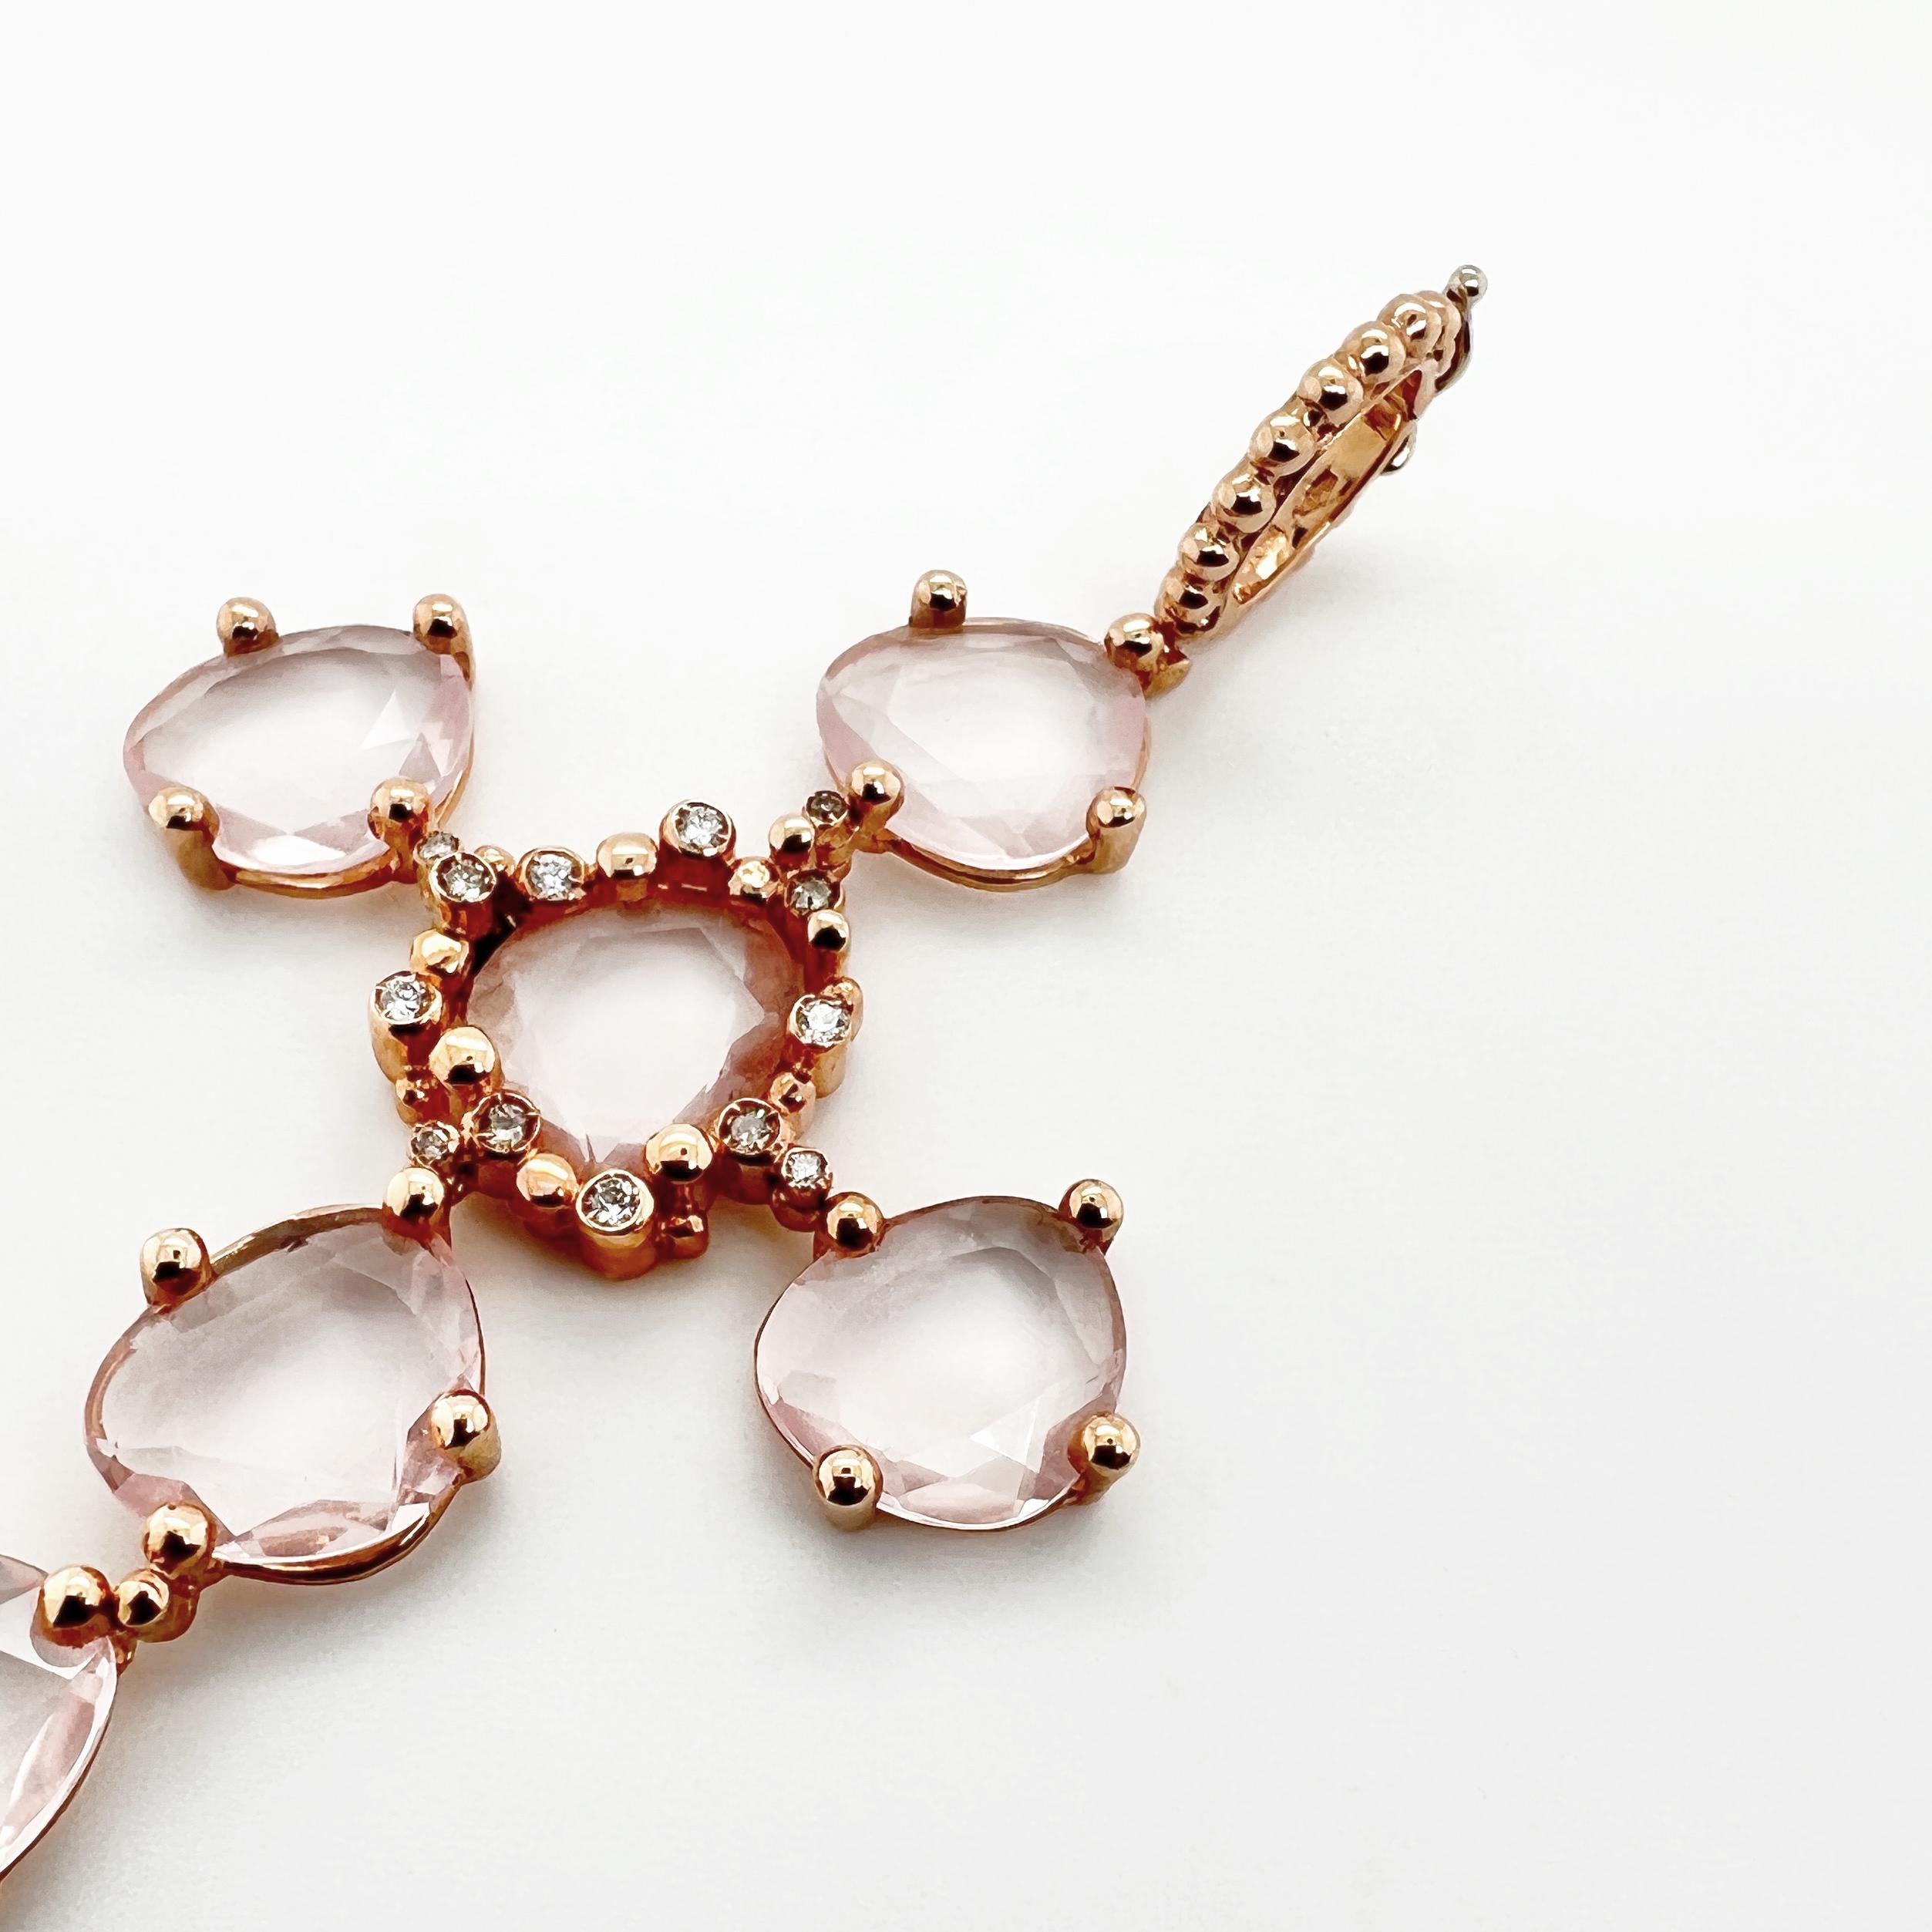 All of our jewellery is made by Italian Artisans to guarantee the Made In Italy manufacturing. 

The 18kt Pink Gold Cross pendant with Pink Quartz and Natural Diamonds is a meaningful piece of jewelry. Pink gold has a warm and feminine hue that adds